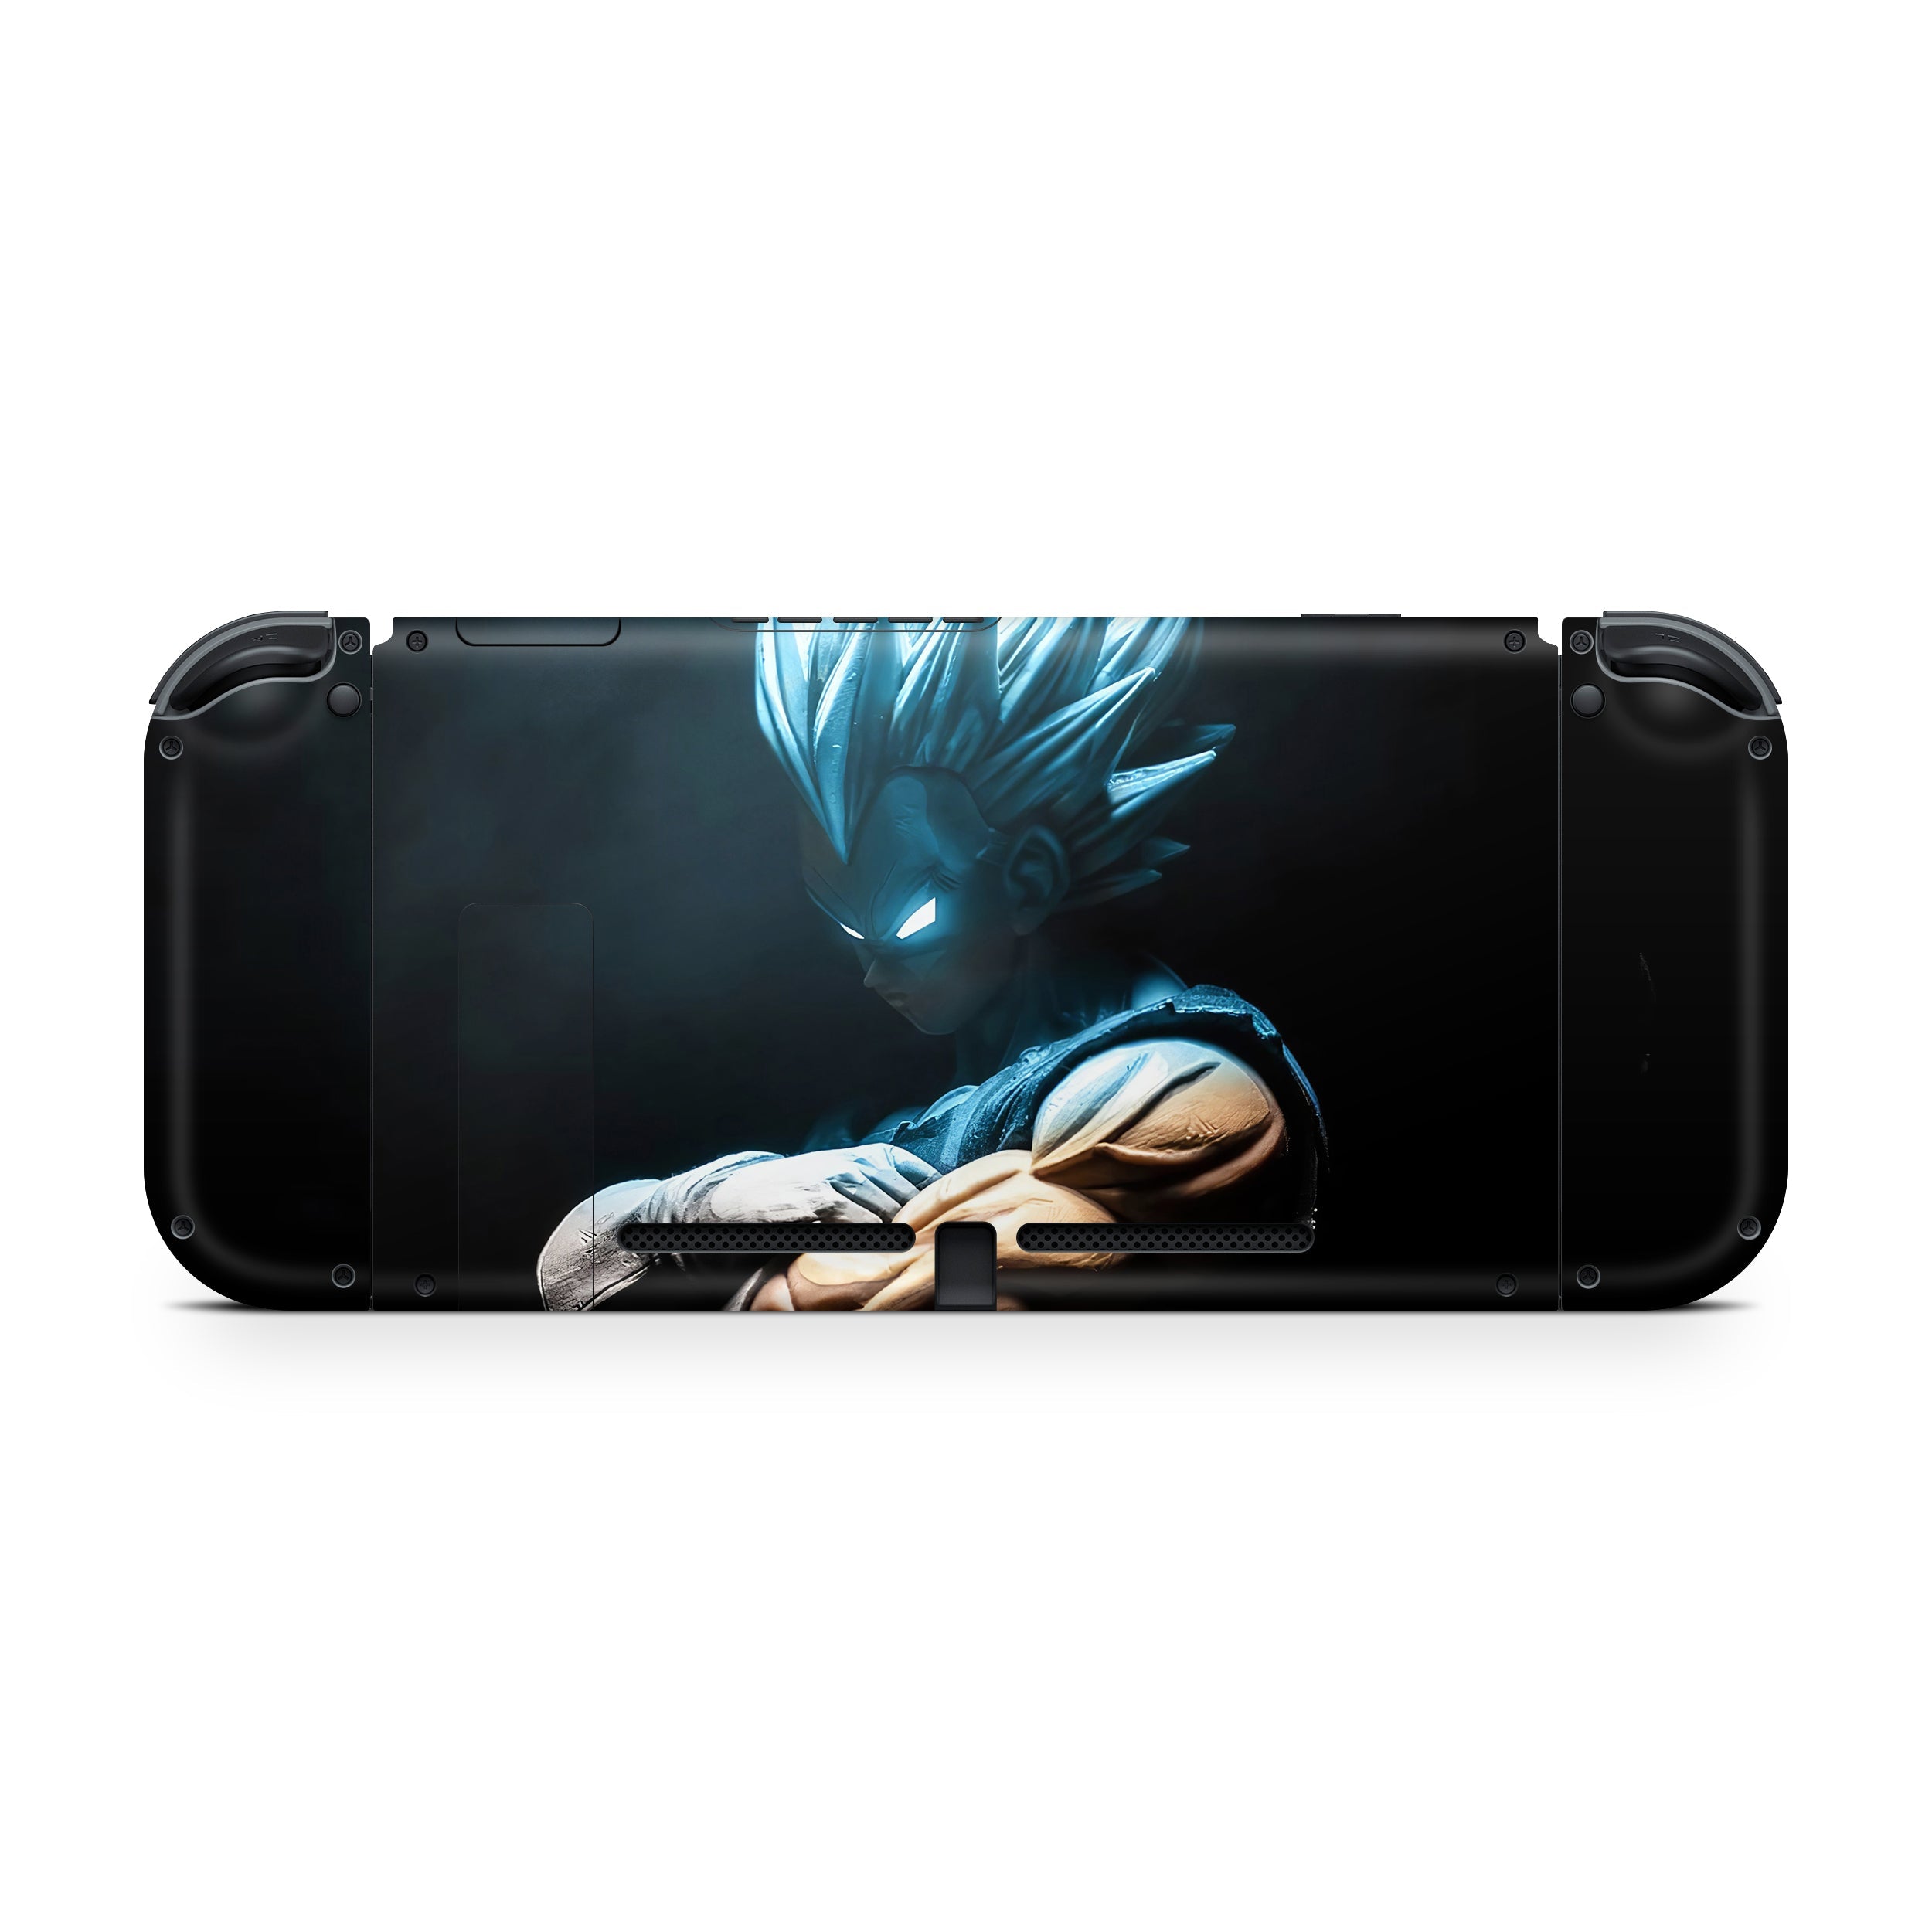 A video game skin featuring a Dragon Ball Super Vegeta design for the Nintendo Switch.